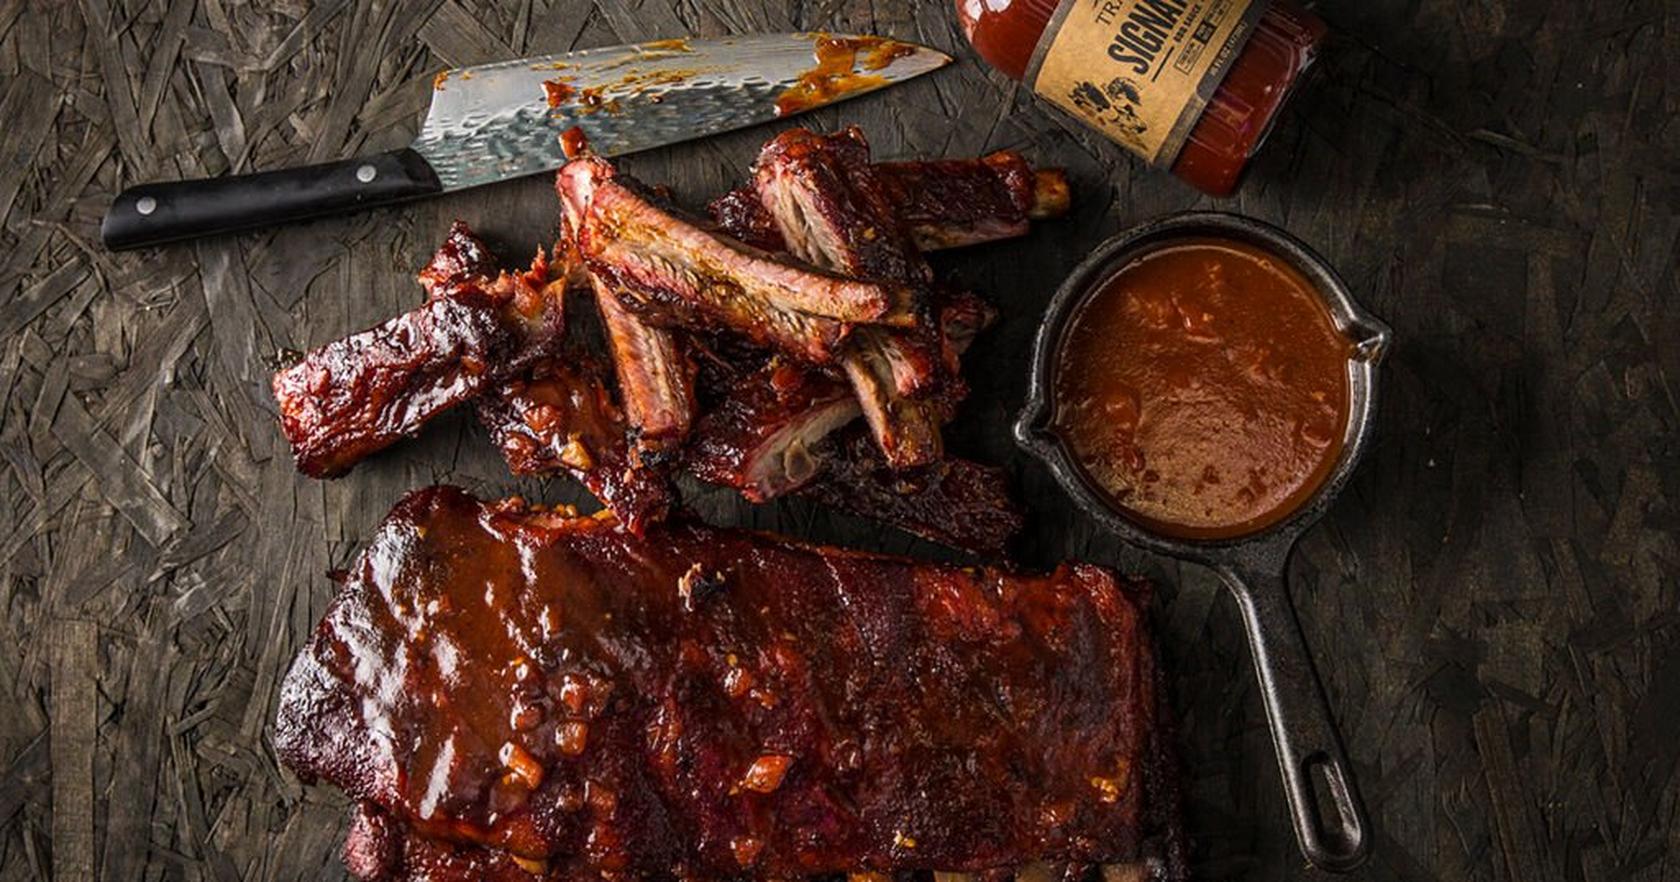 image of Smoked Ribs With Coconut Rum BBQ Sauce by Journey South